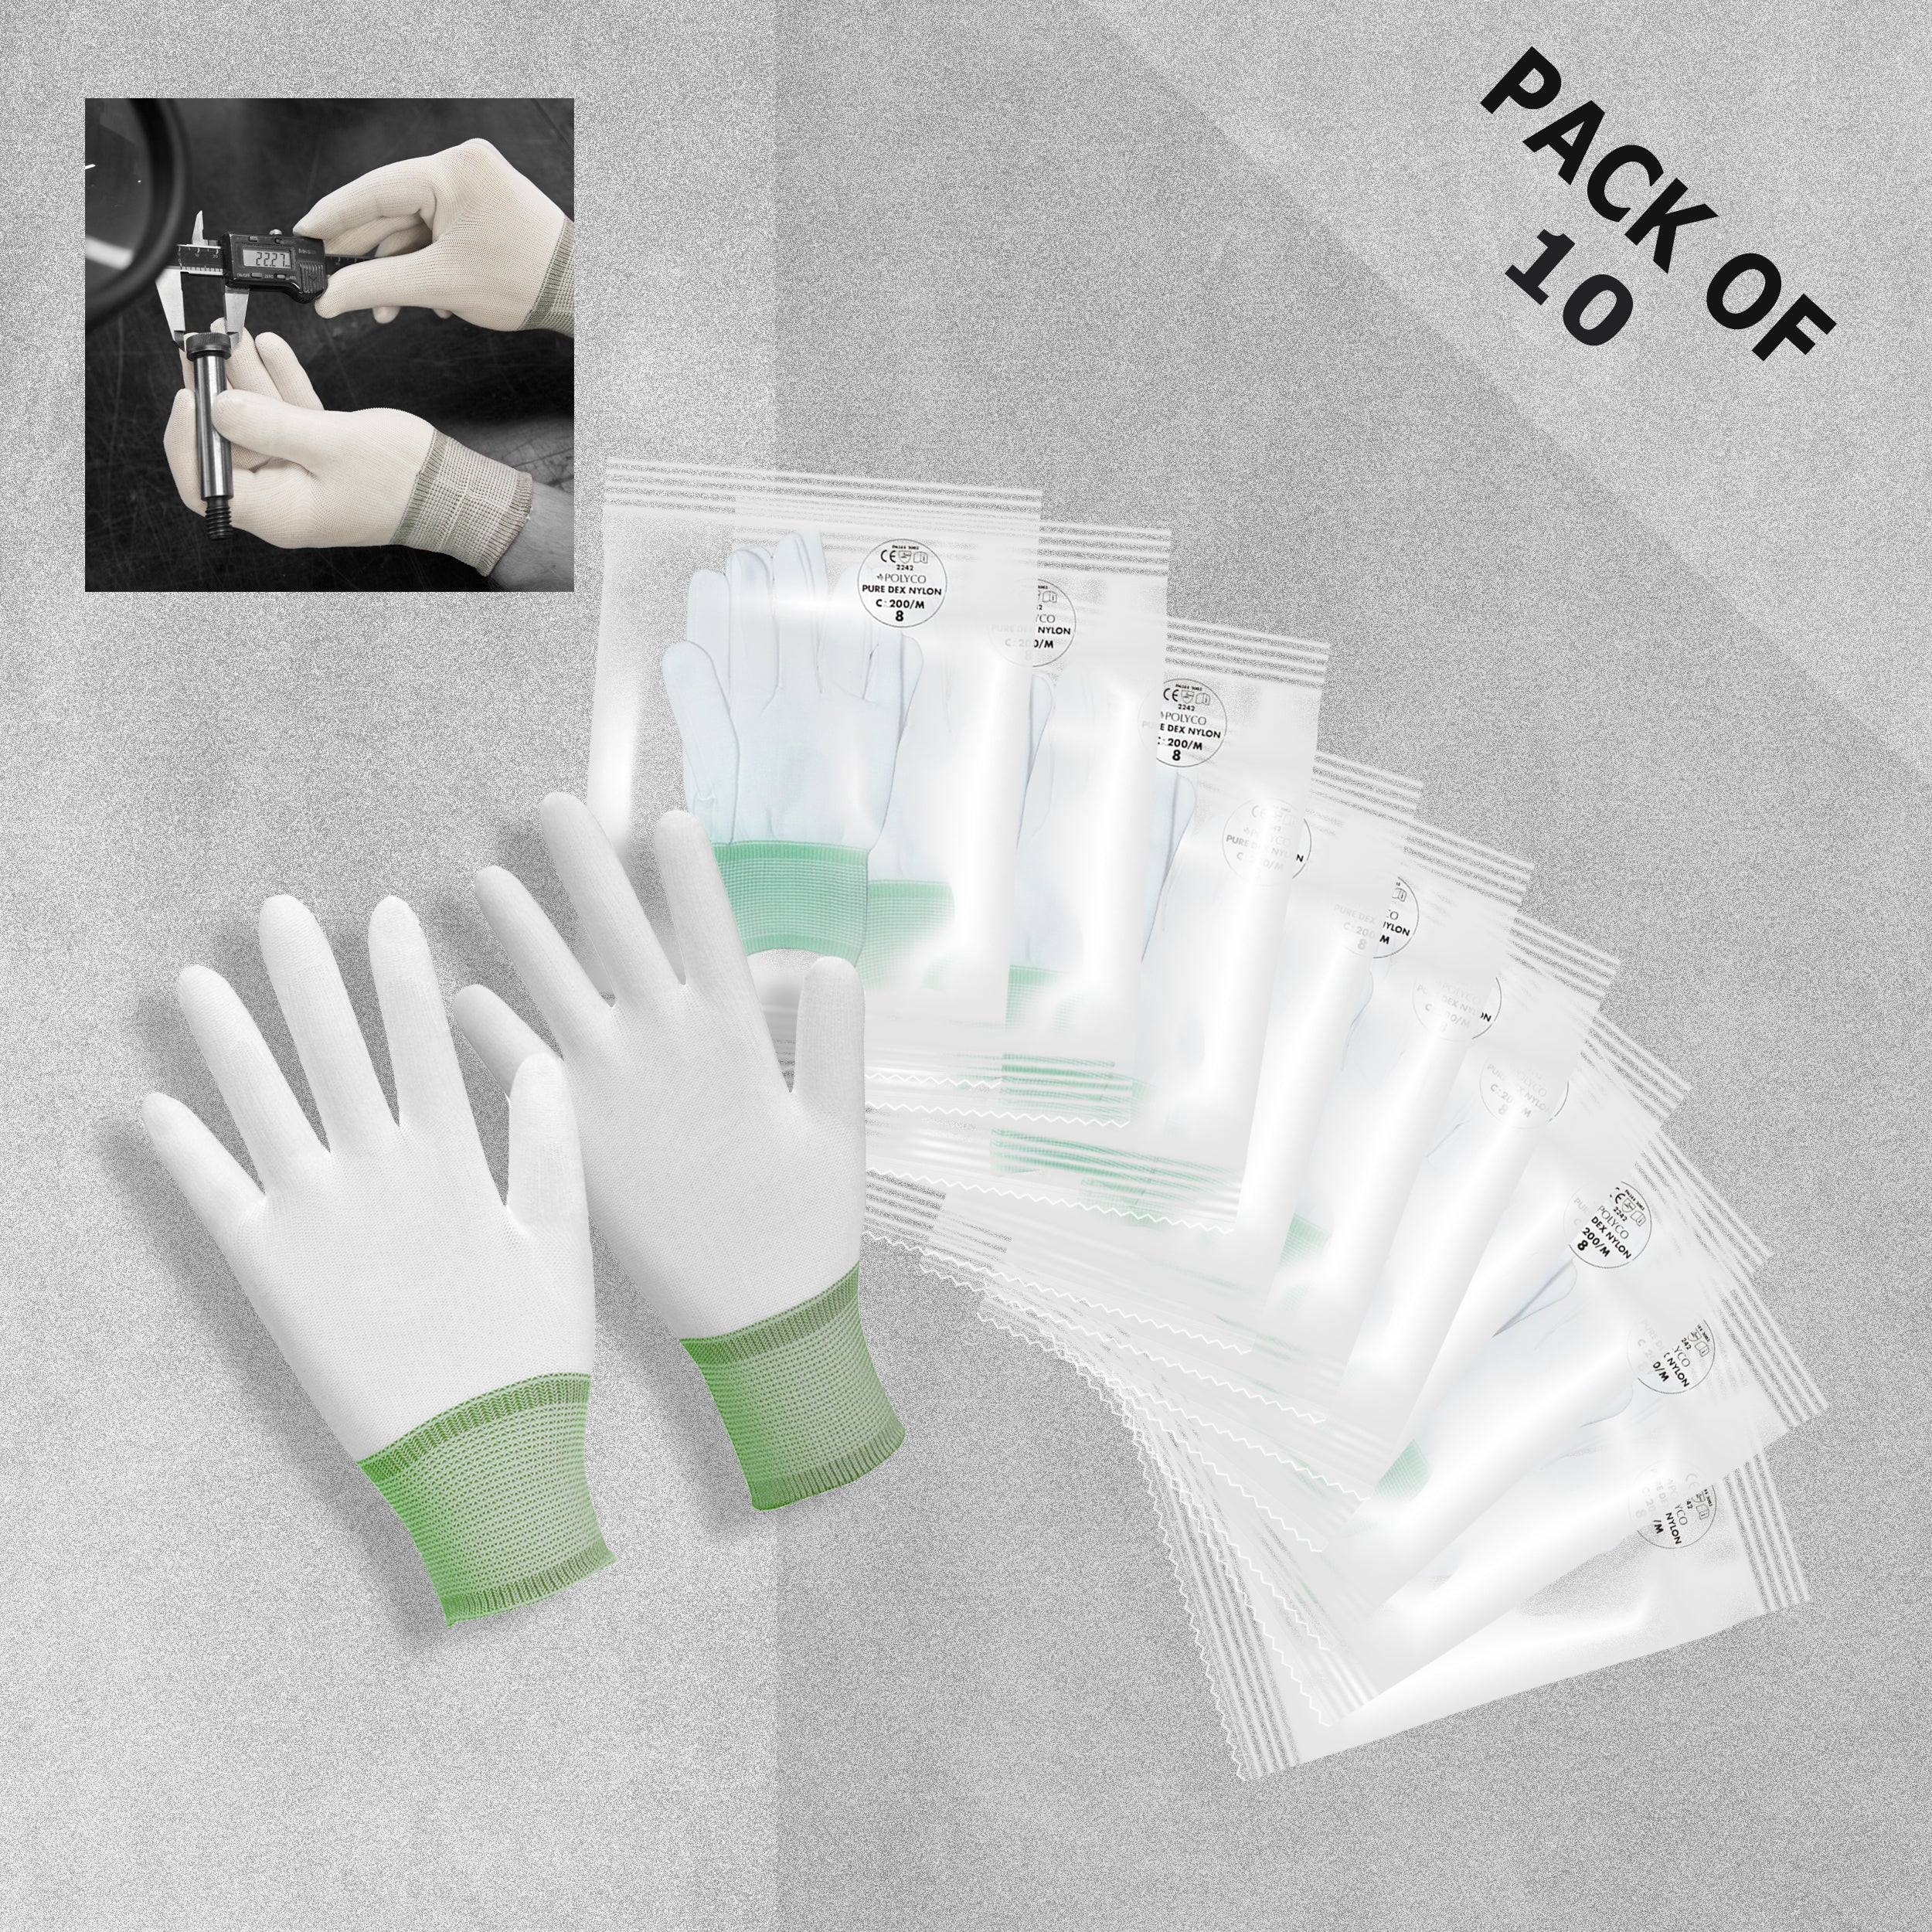 Polyco Pure Dex Nylon Inspection Gloves Size 8 Medium - Pack of 10 Pairs